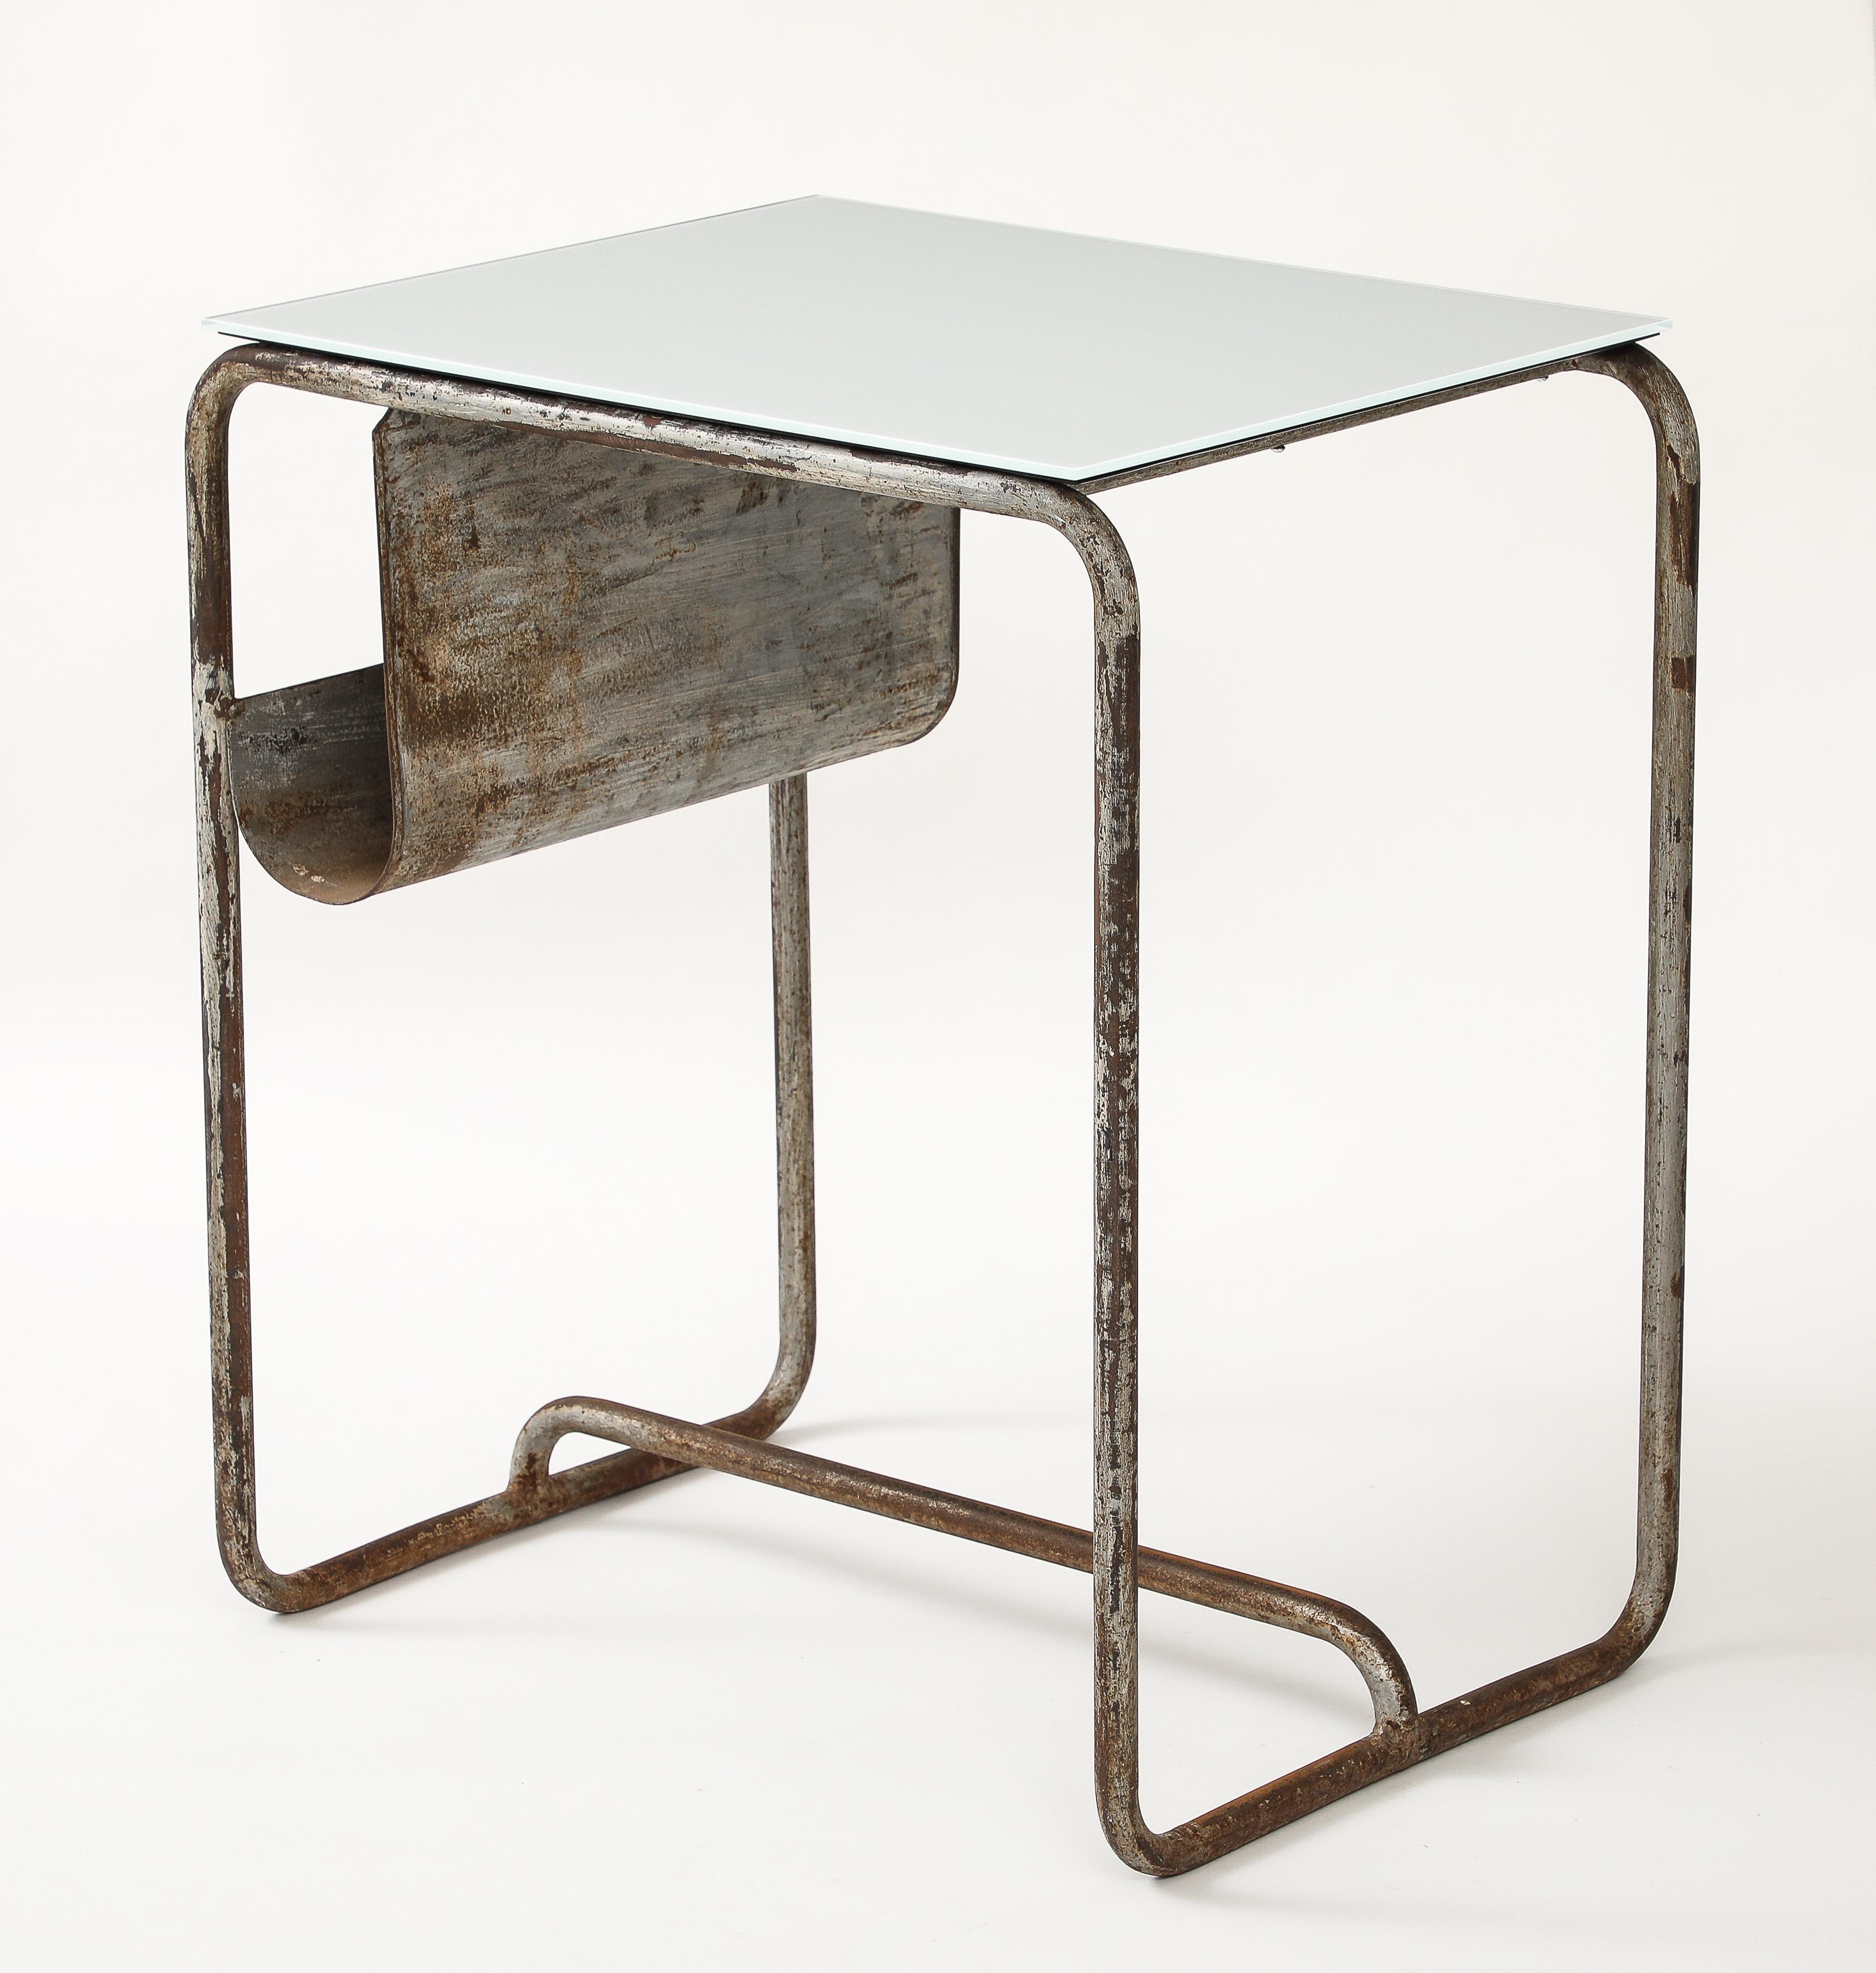 Early Modernist Desk Side Table, Nickel Patina, Opaline Top, France, c. 1920 For Sale 2